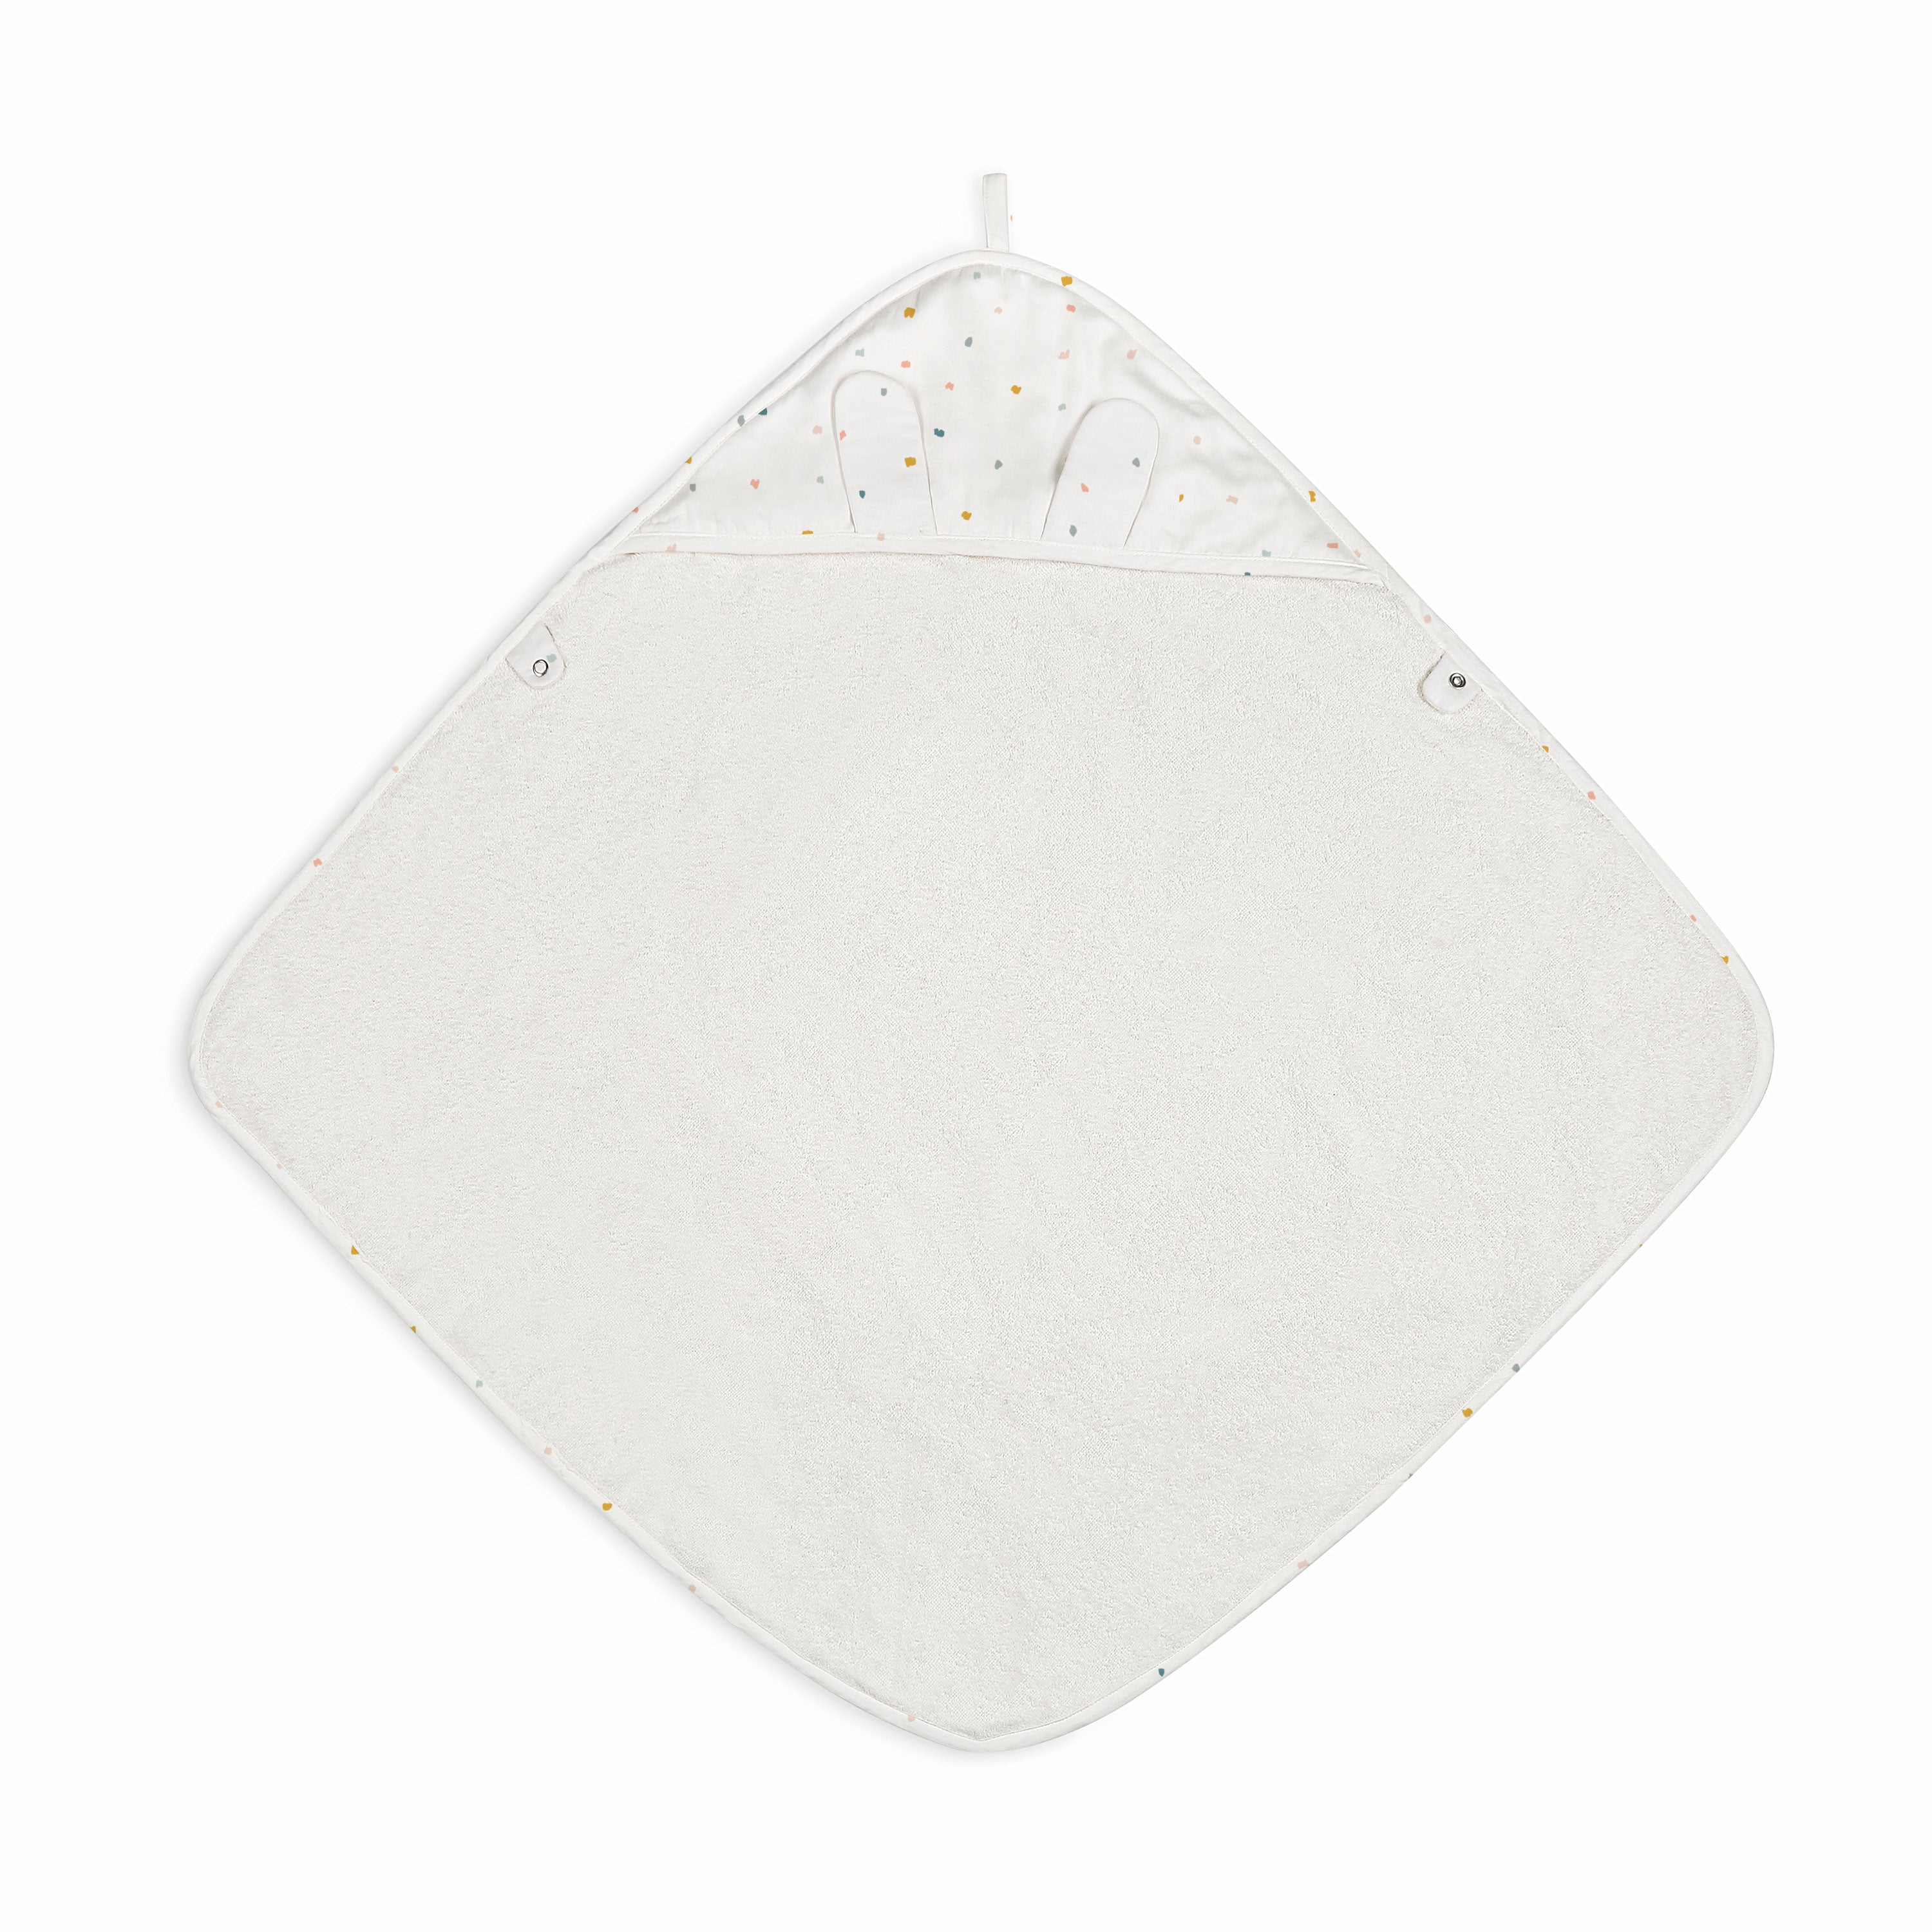 A square, light gray Organic Cotton Hooded Baby Towel & Poncho - Dotty with rounded corners and a pattern of colored dots along the border, folded into a triangular shape with a loop for hanging. Brand: Makemake Organics